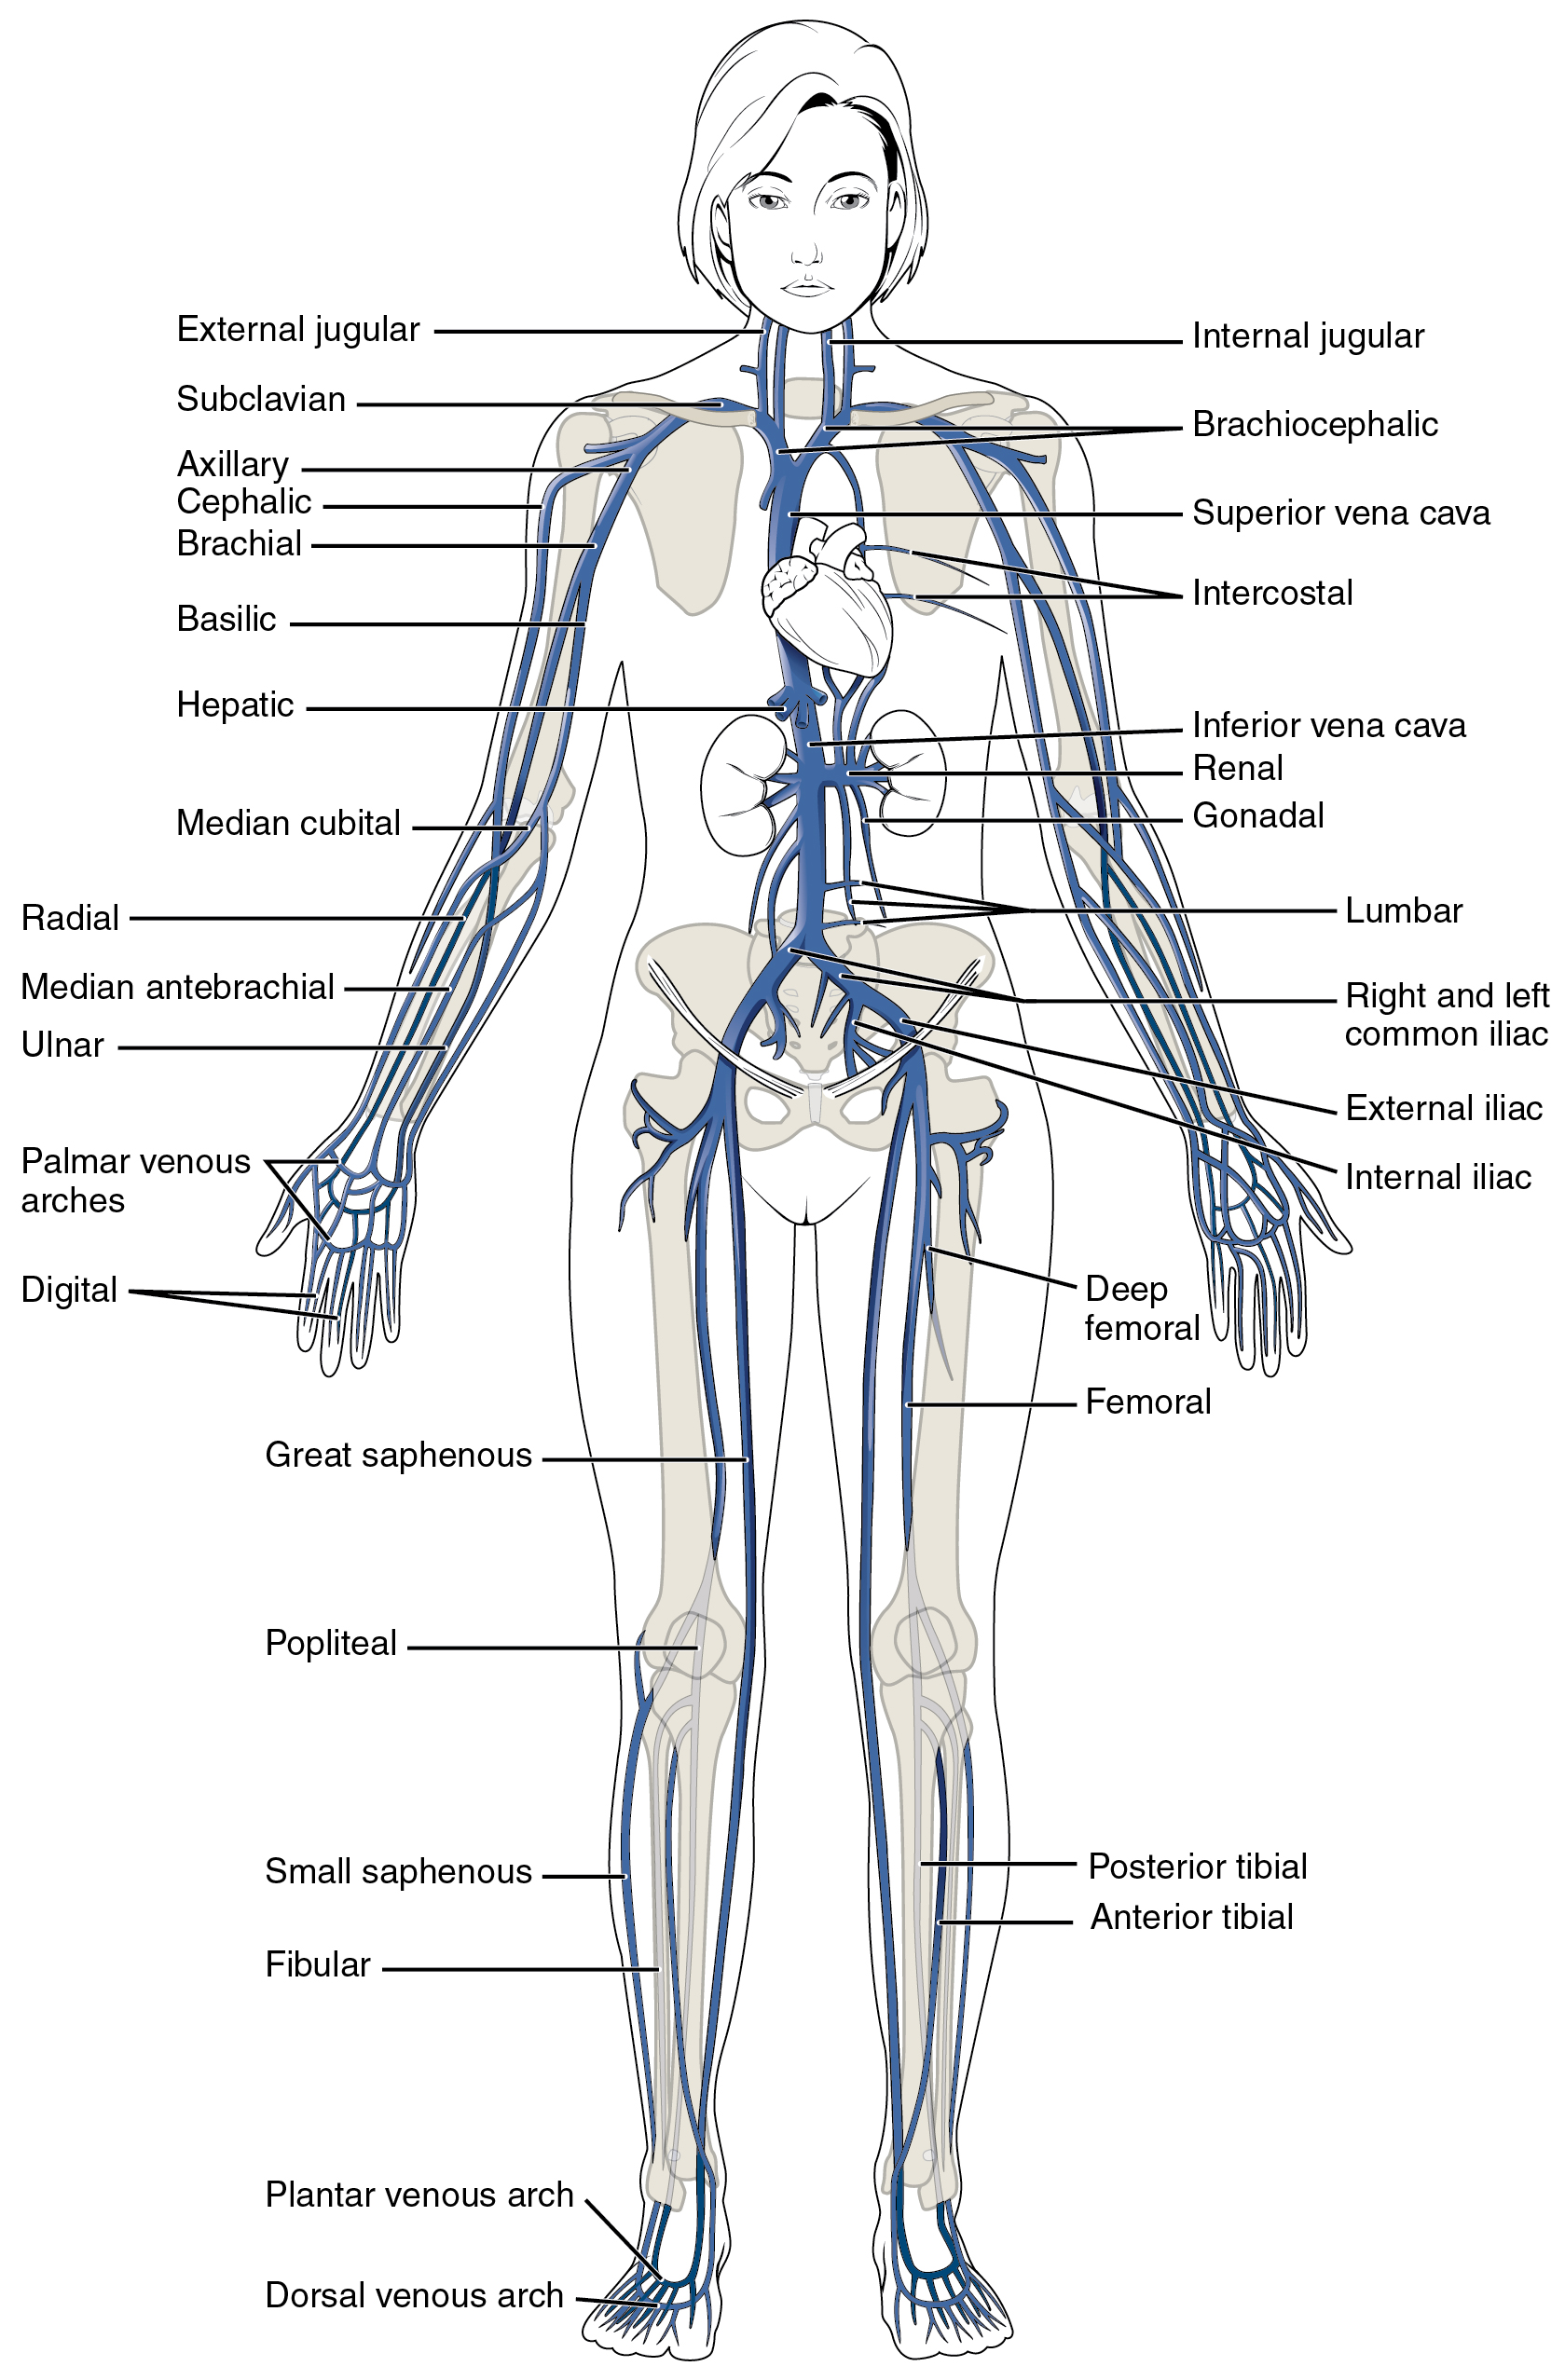 Openstax Anatphys Fig2035 Major Systematic Veins English Labels Anatomytool 4242